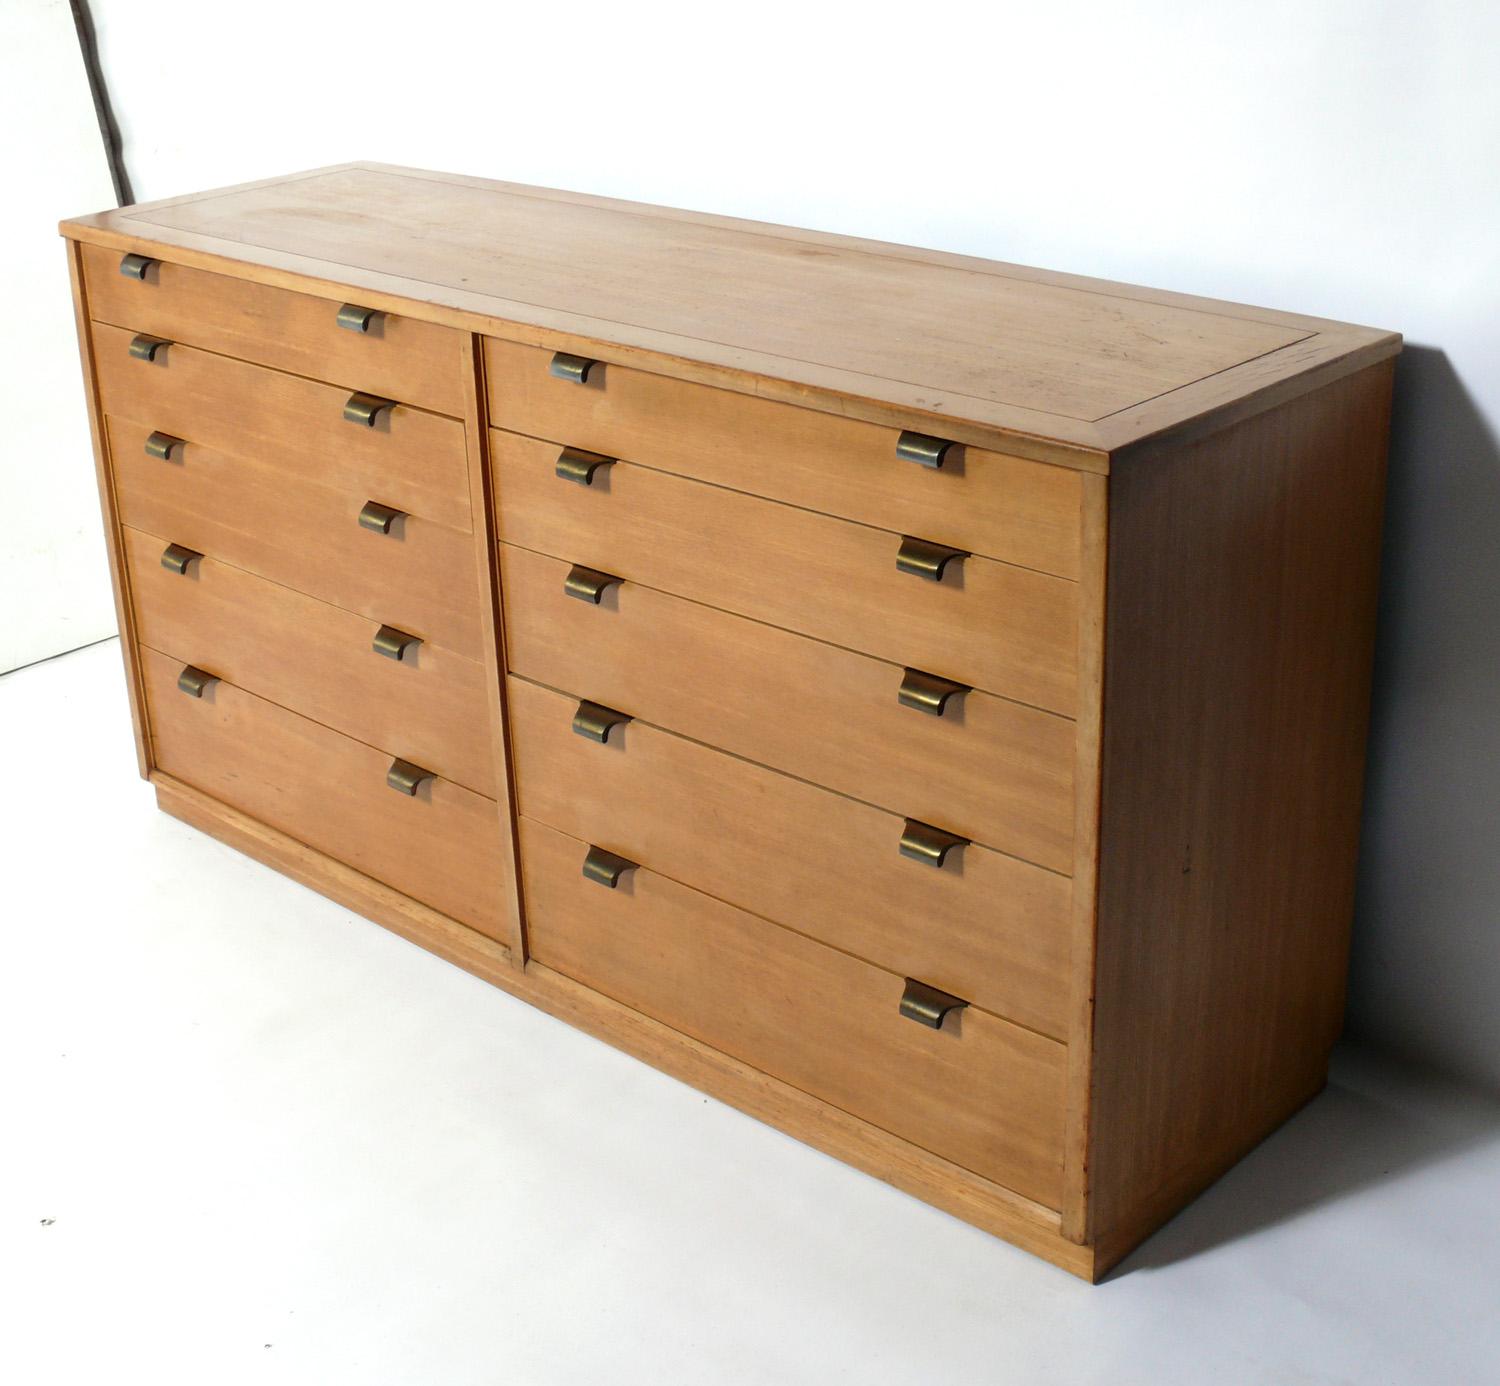 Elegant chest or dresser, designed by Edward Wormley for Drexel Precedent, American, circa 1950s. This chest is currently being refinished and can be completed in your choice of color. The price noted includes refinishing in your choice of color. It